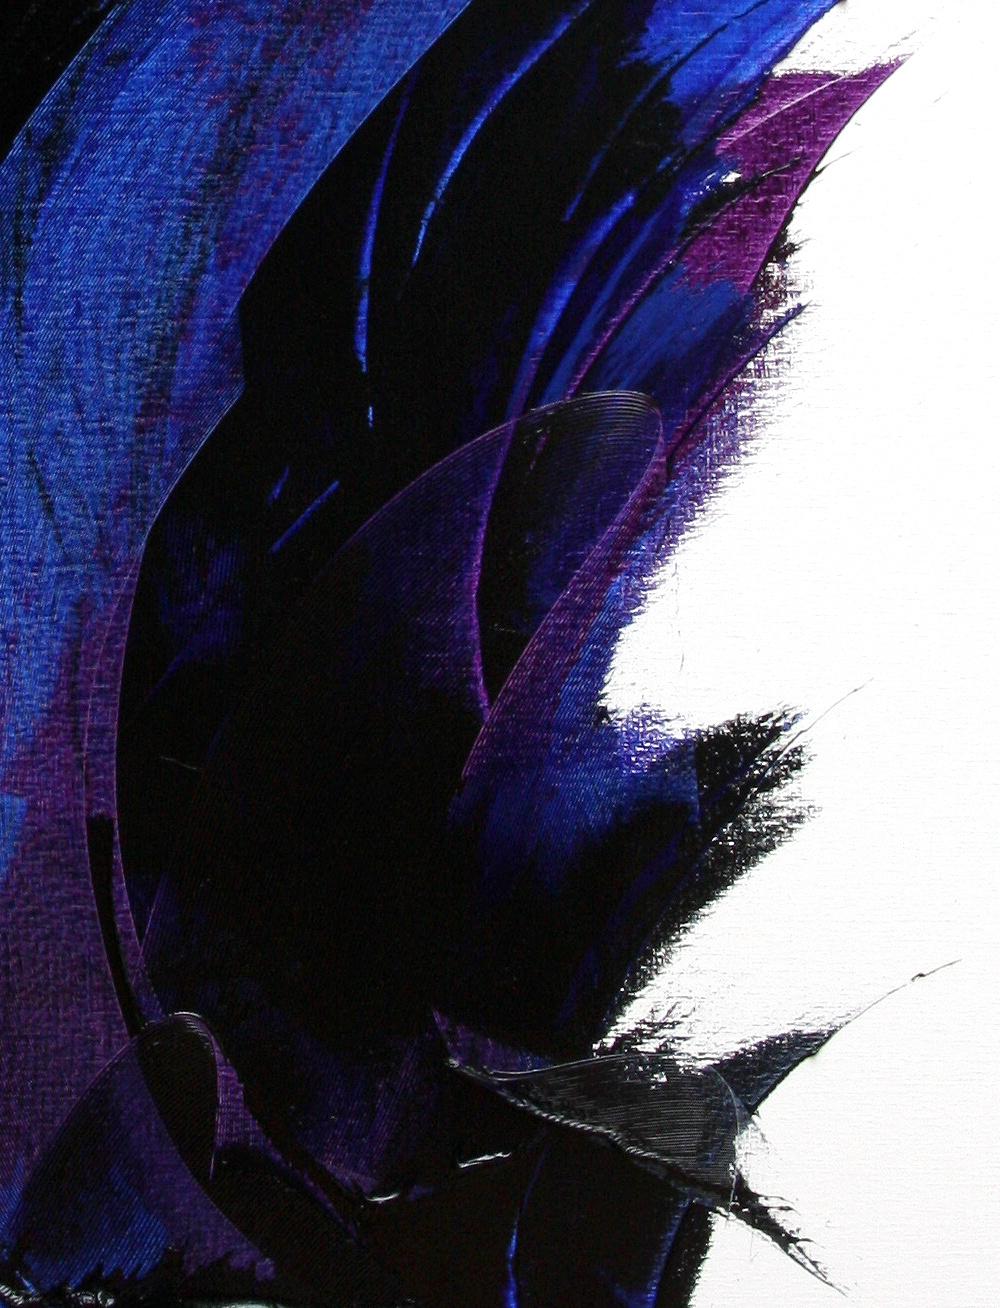 This large artwork is a true masterpiece.  The comb provides a surprising transparency to the deep blue ascending movements, while the shades of purple somehow reinforce the strength of the blacks.  Yet the splatters of black in the lower part of